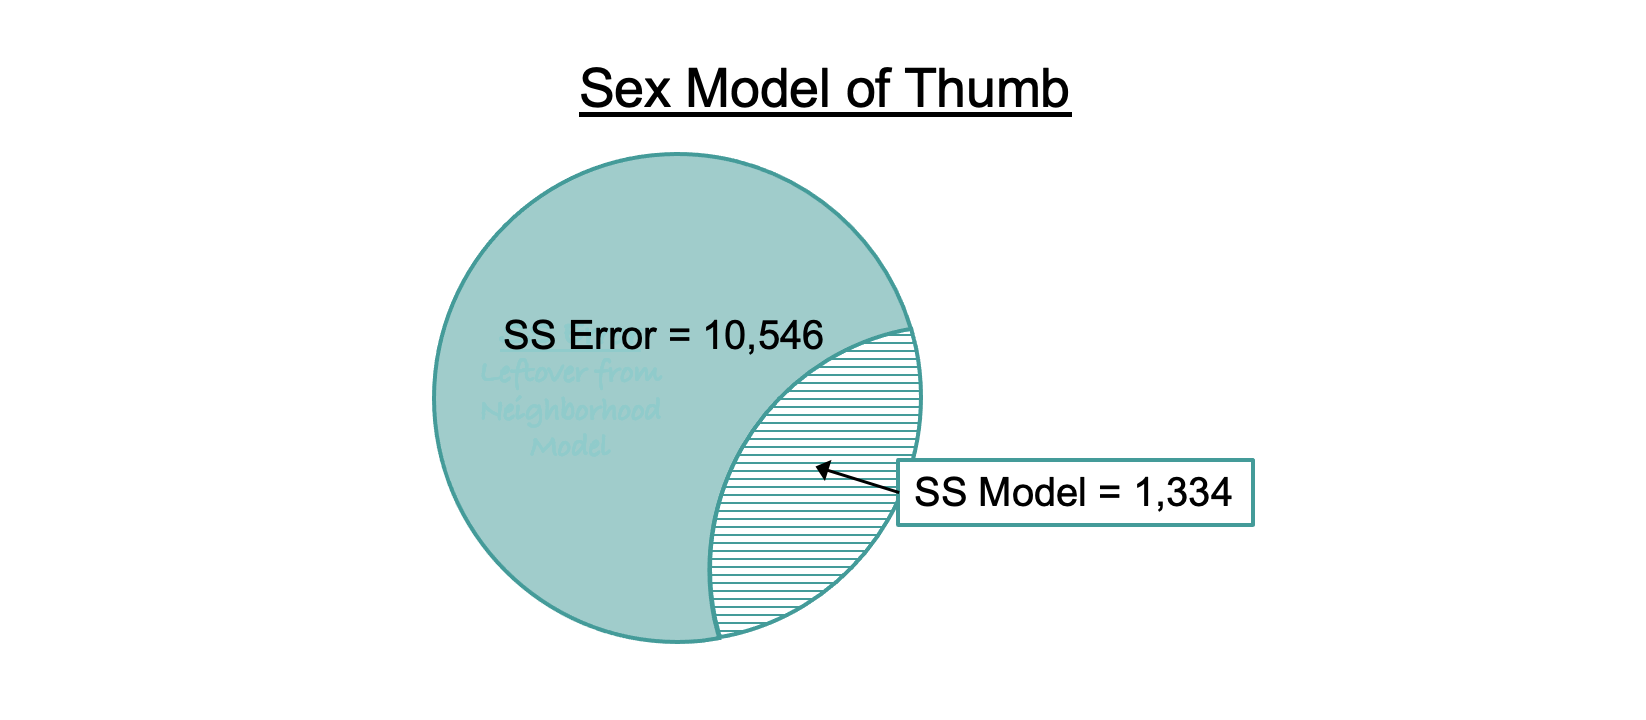 Venn diagram of the Sex Model of Thumb, represented as a single teal circle labeled as SS Error equals 10,546. A portion of the circle is shaded in white with teal lines and labeled as SS Model equals 1,334.